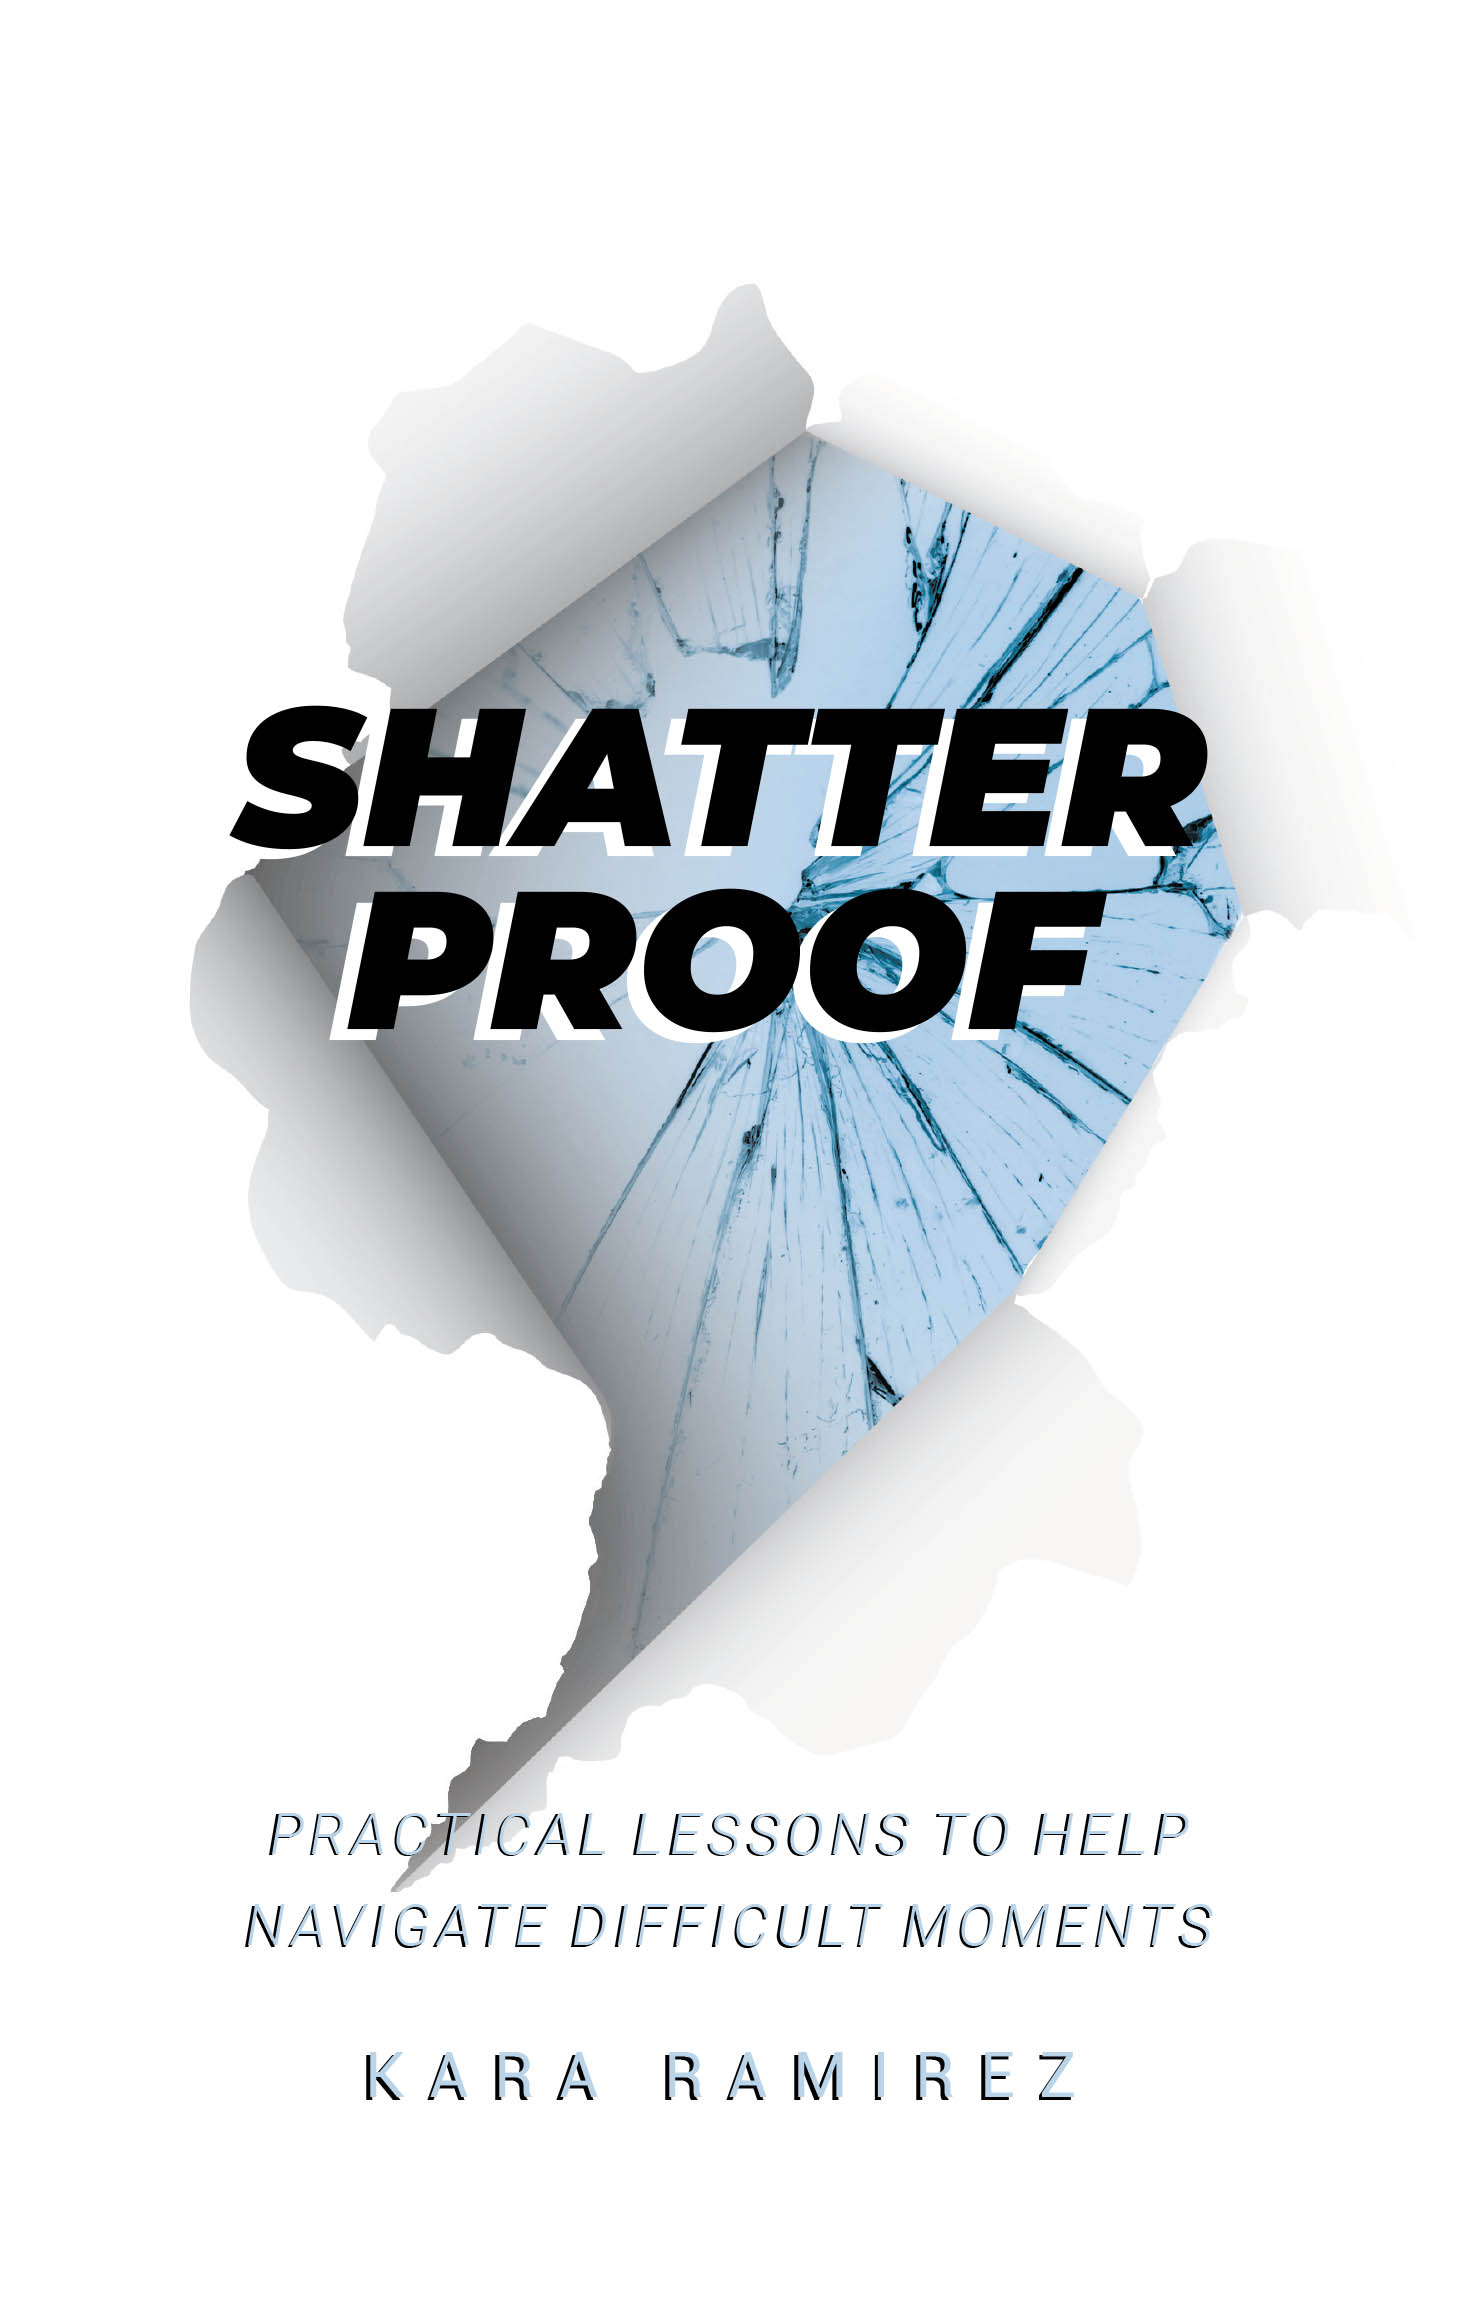 Author Kara Ramirez’s New Book, "Shatterproof," Provides the Tools Needed for Readers to Learn How to Trust God & Follow Him Through All of Life's Most Difficult Moments